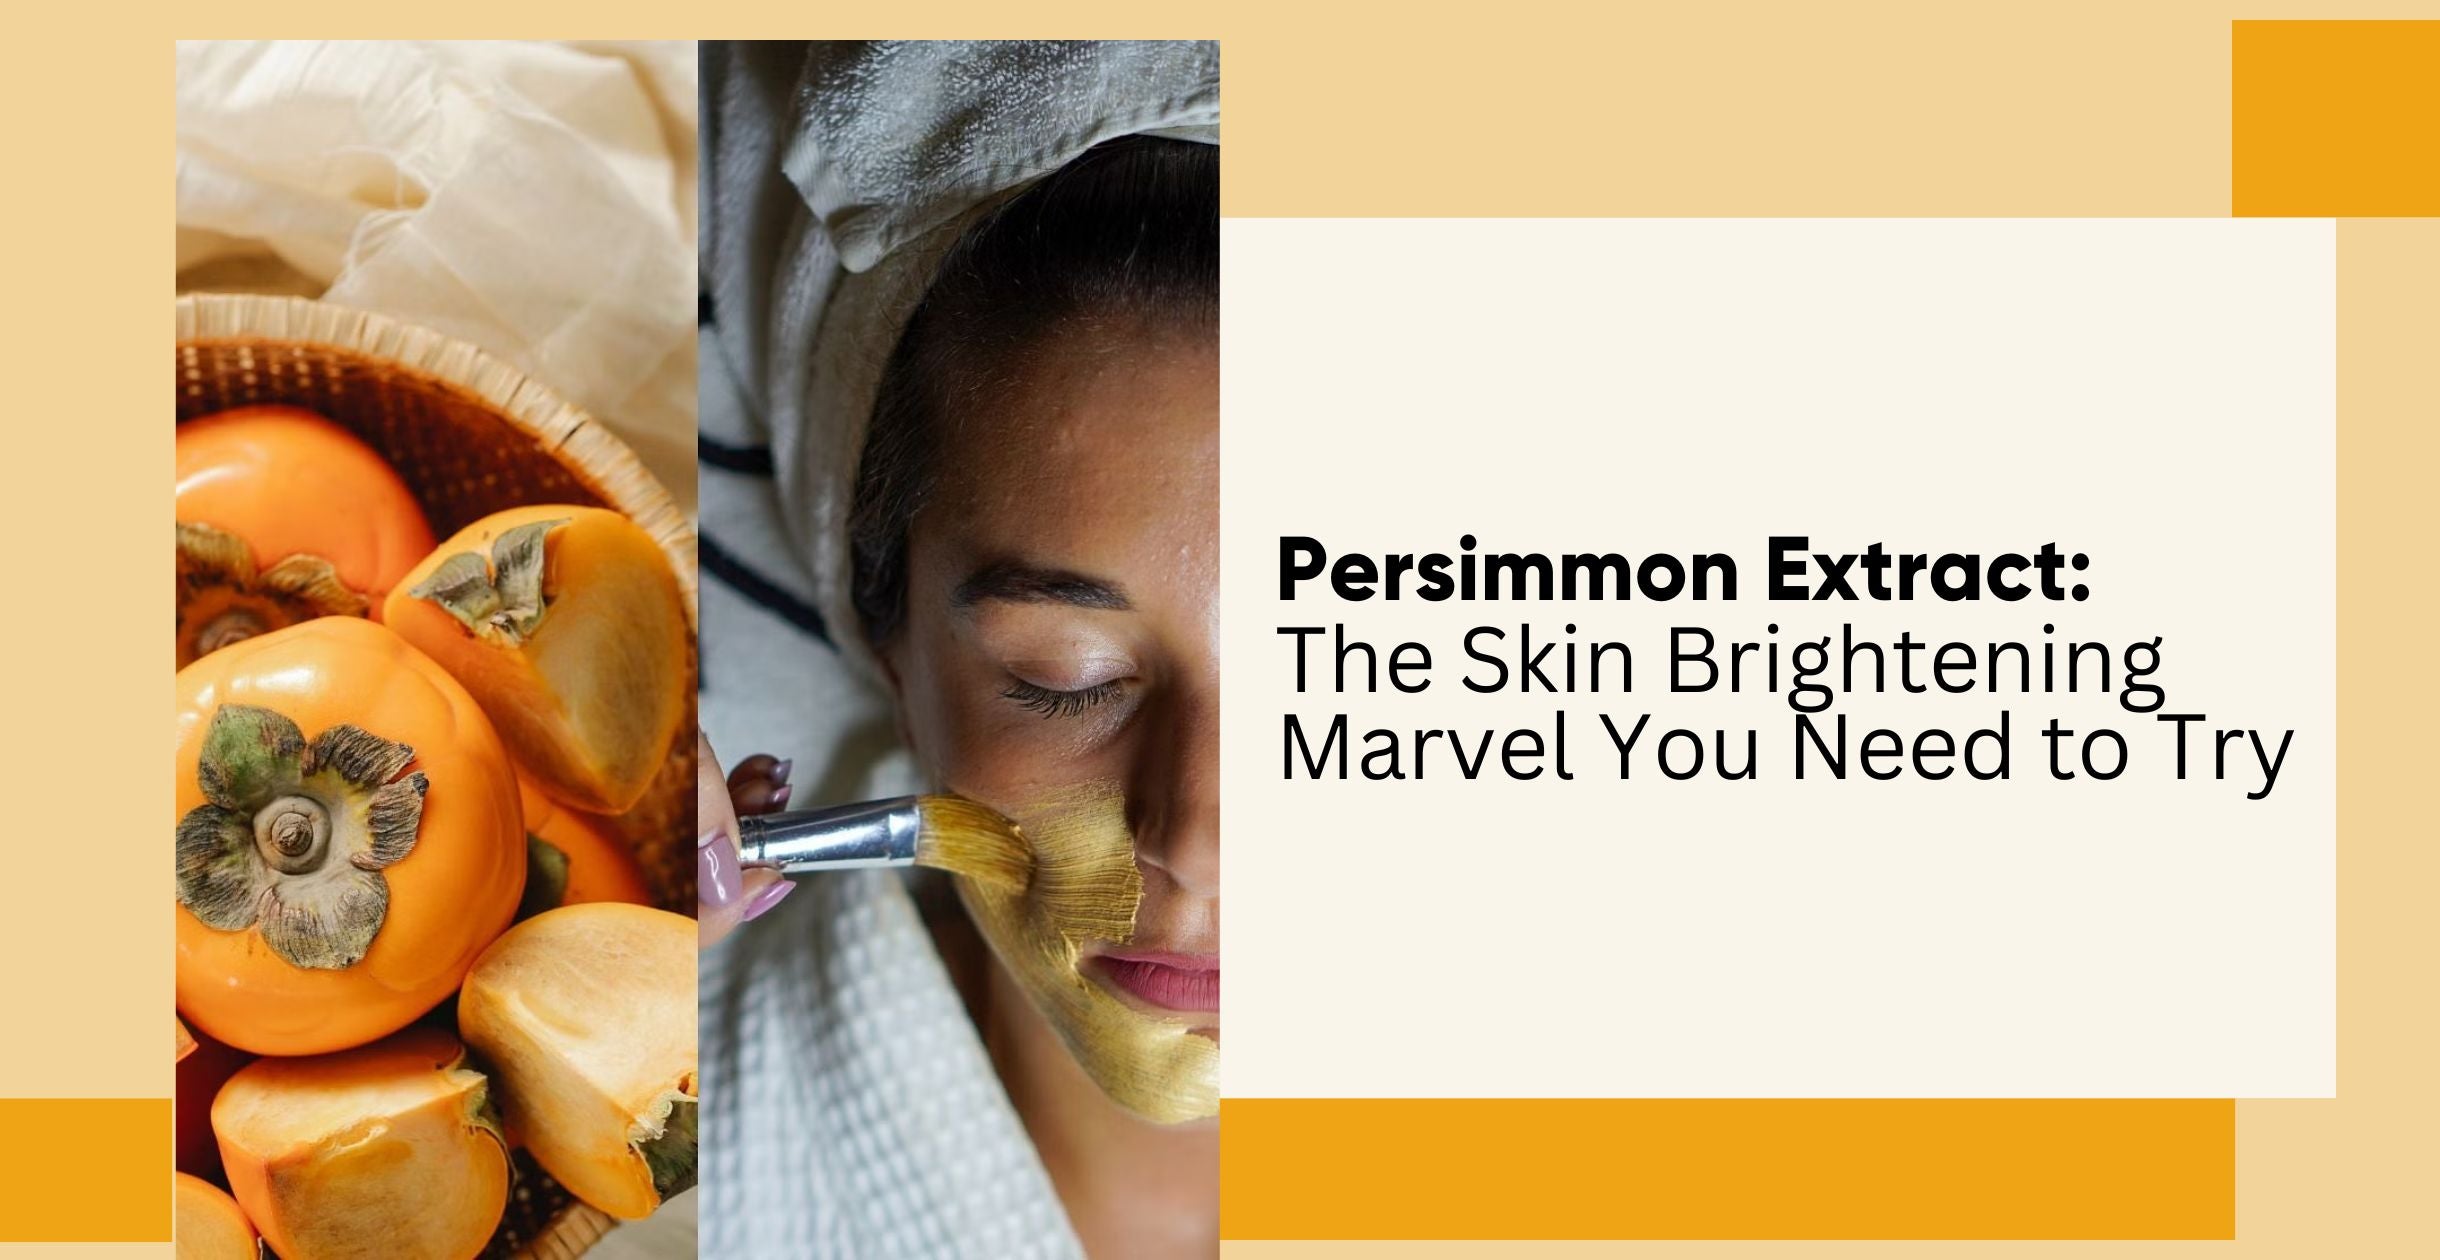 Persimmon Extract: The Skin Brightening Marvel You Need to Try